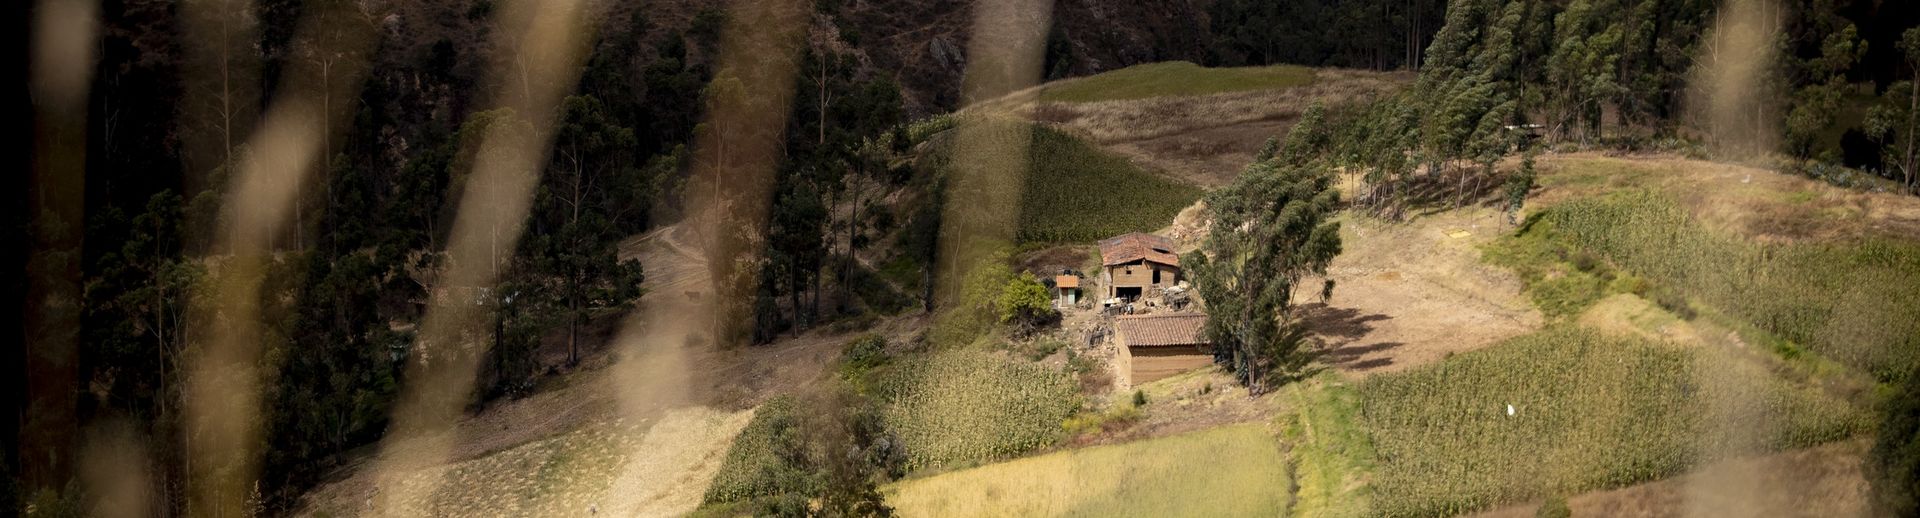 A house in the countryside of Peru.